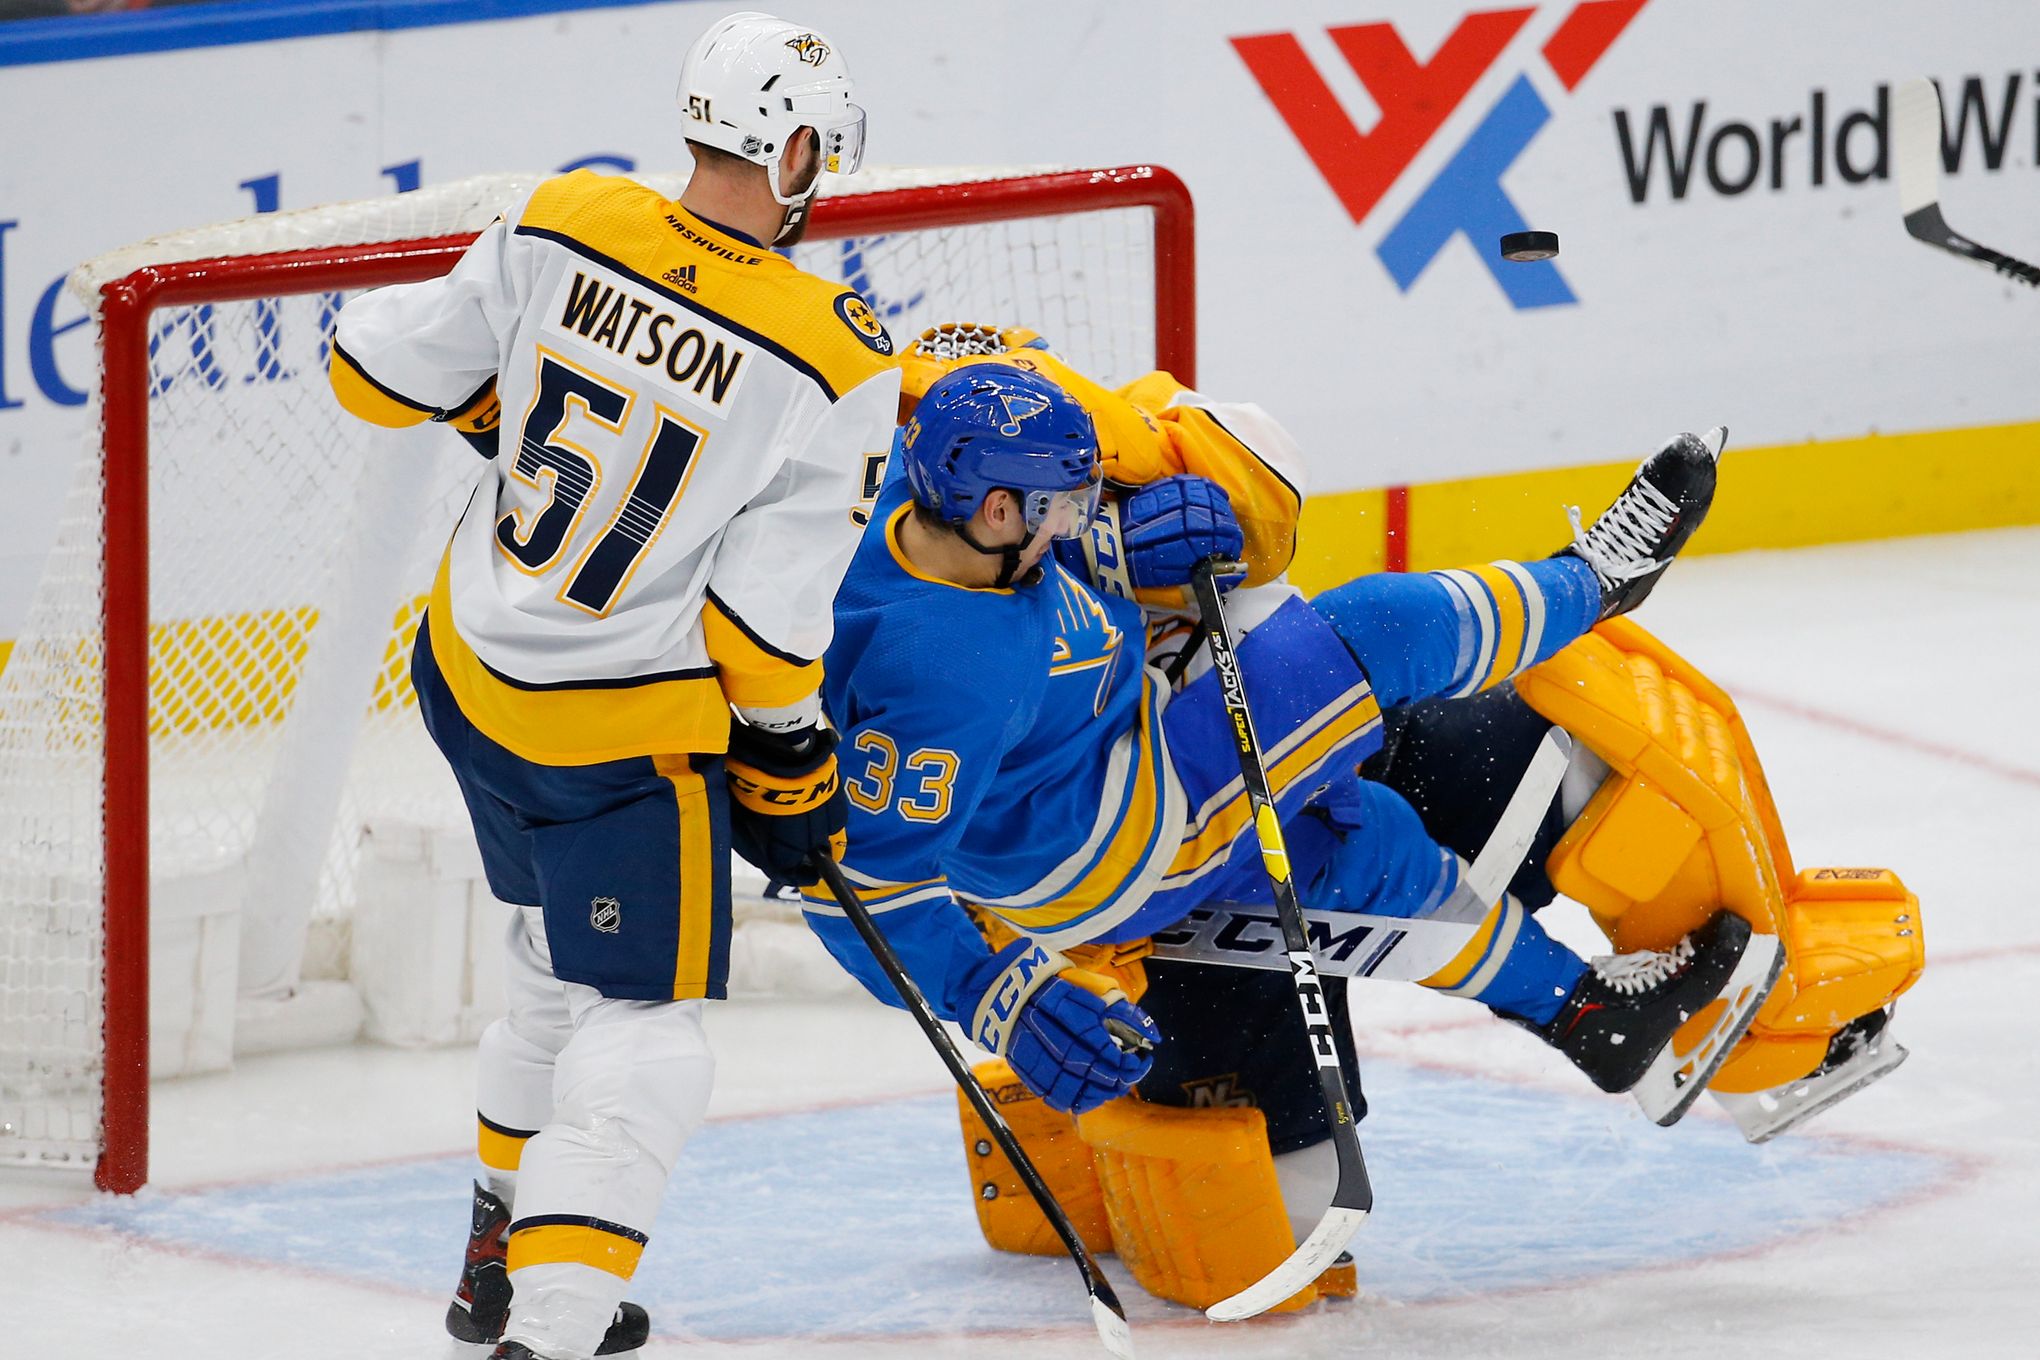 Predators: Mikael Granlund eager to help improve power play